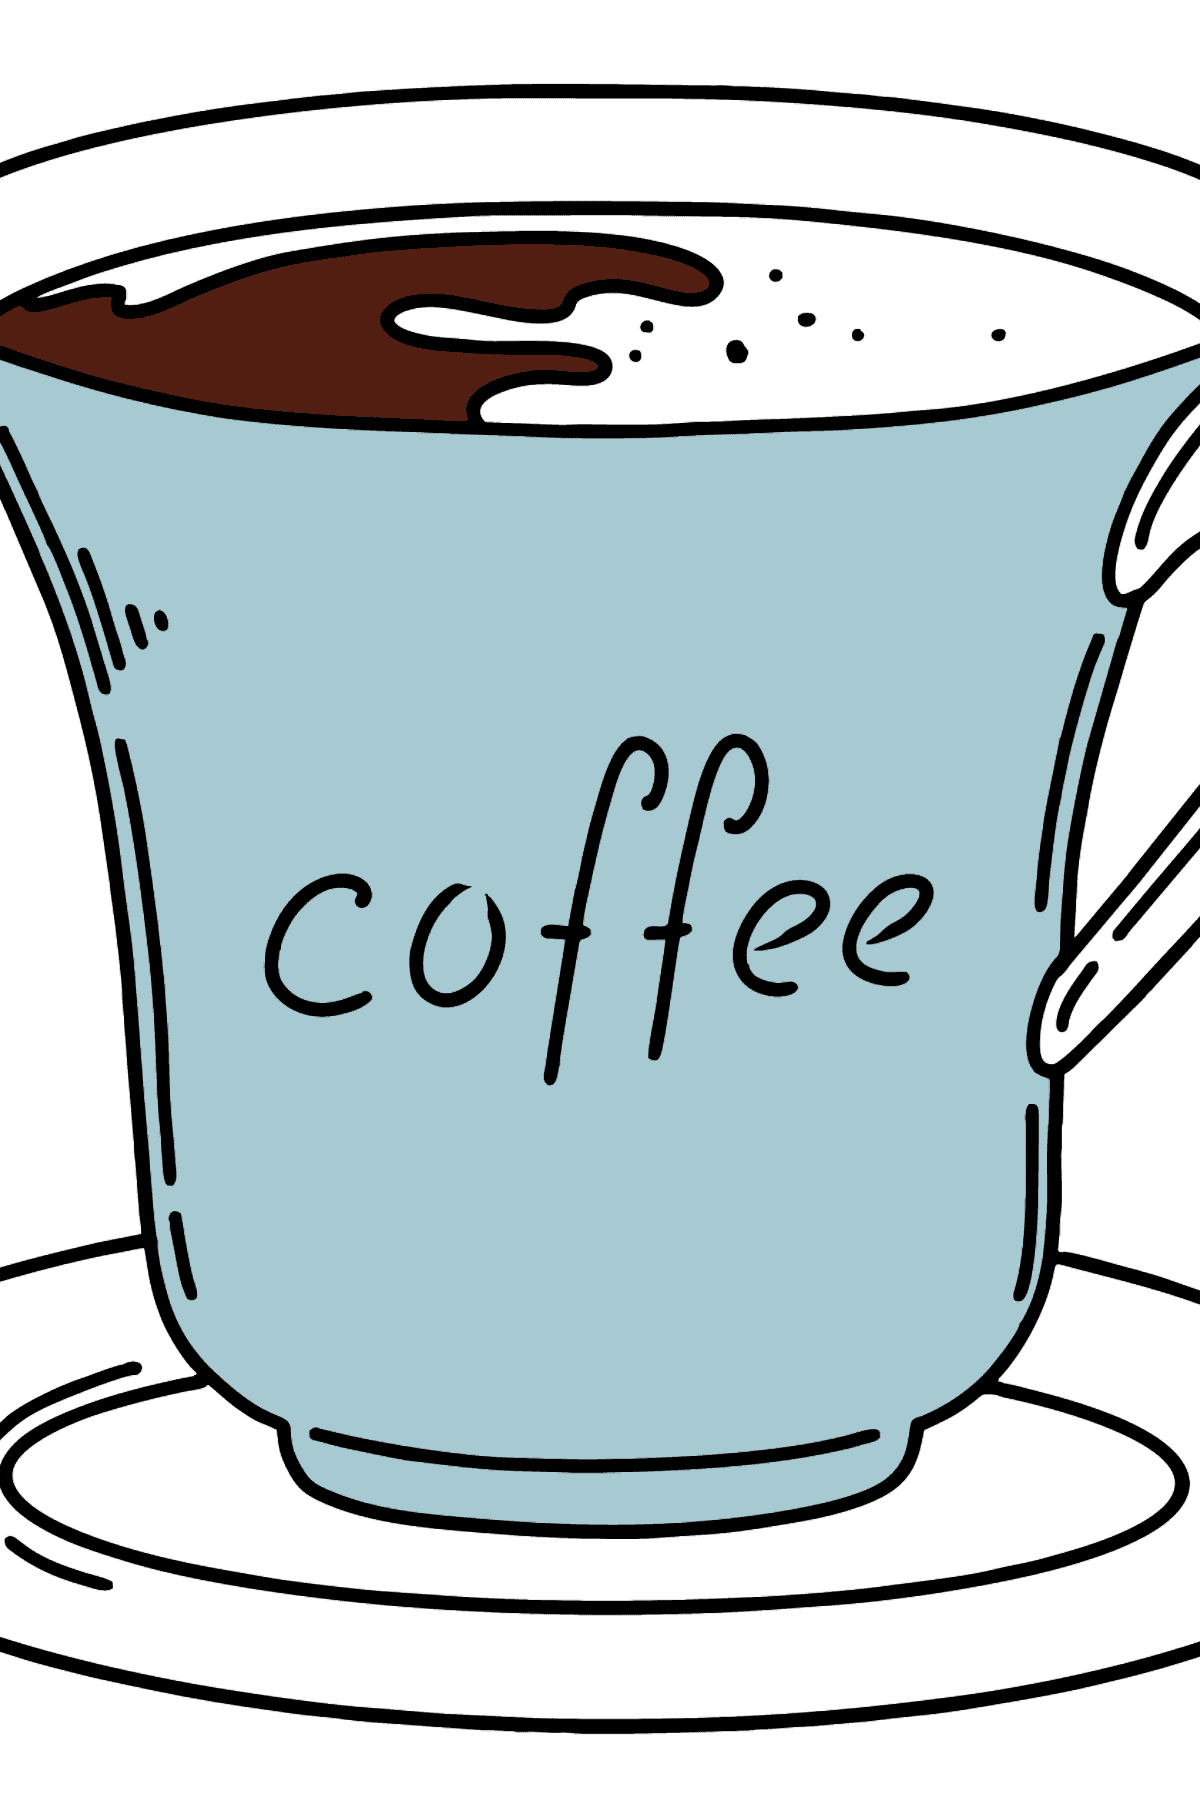 Coffee coloring page - Coloring Pages for Kids